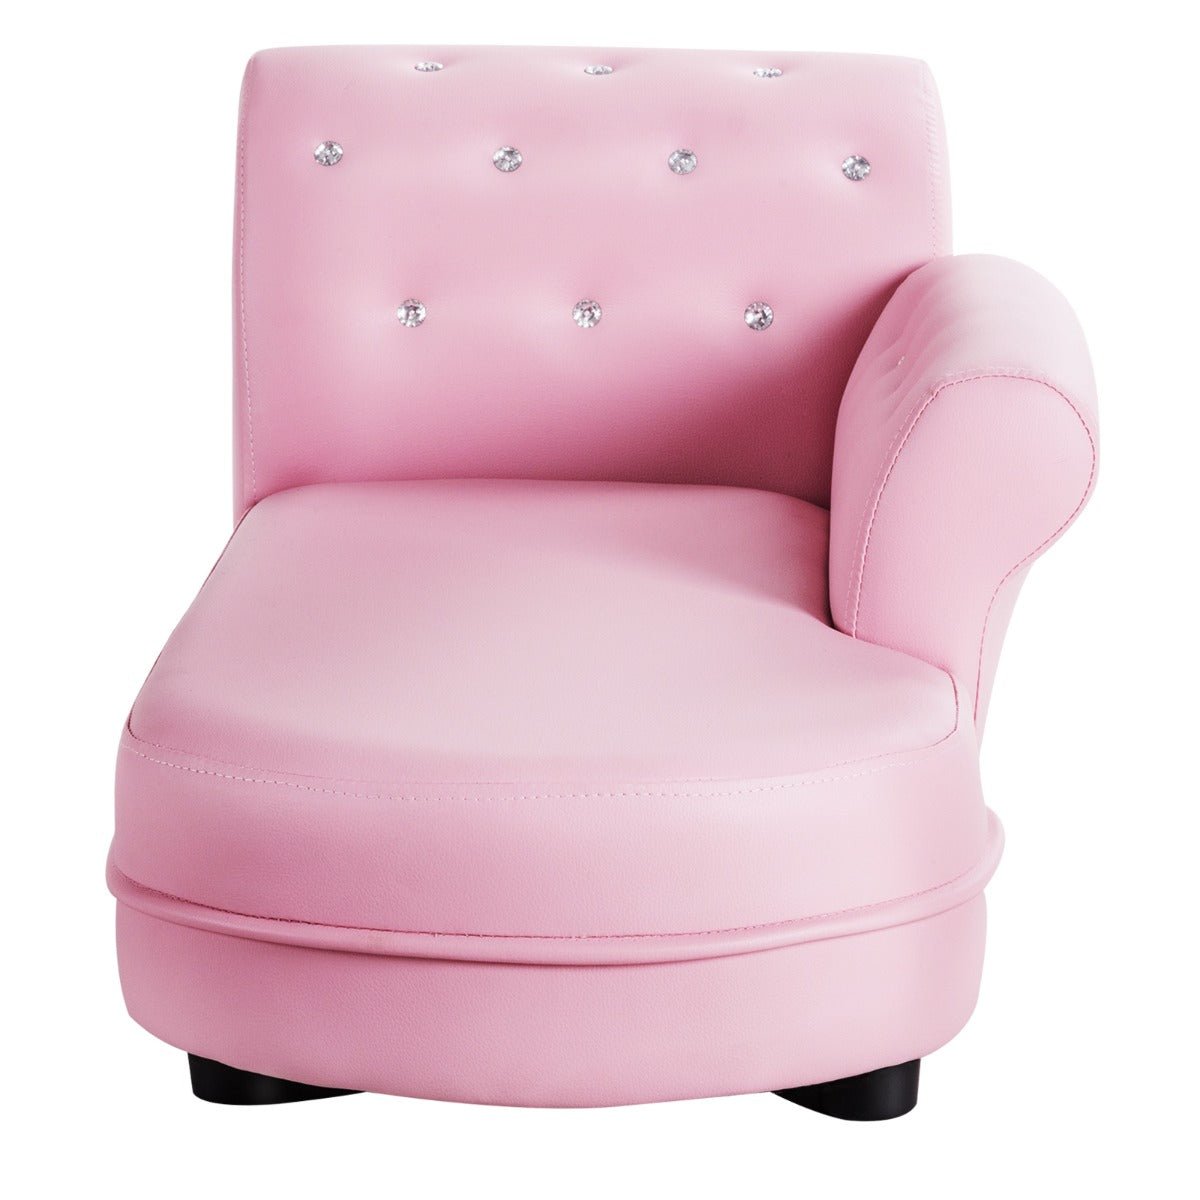 Pink Children's Sofa: PVC Leather and Embedded Crystals - Luxe Coziness